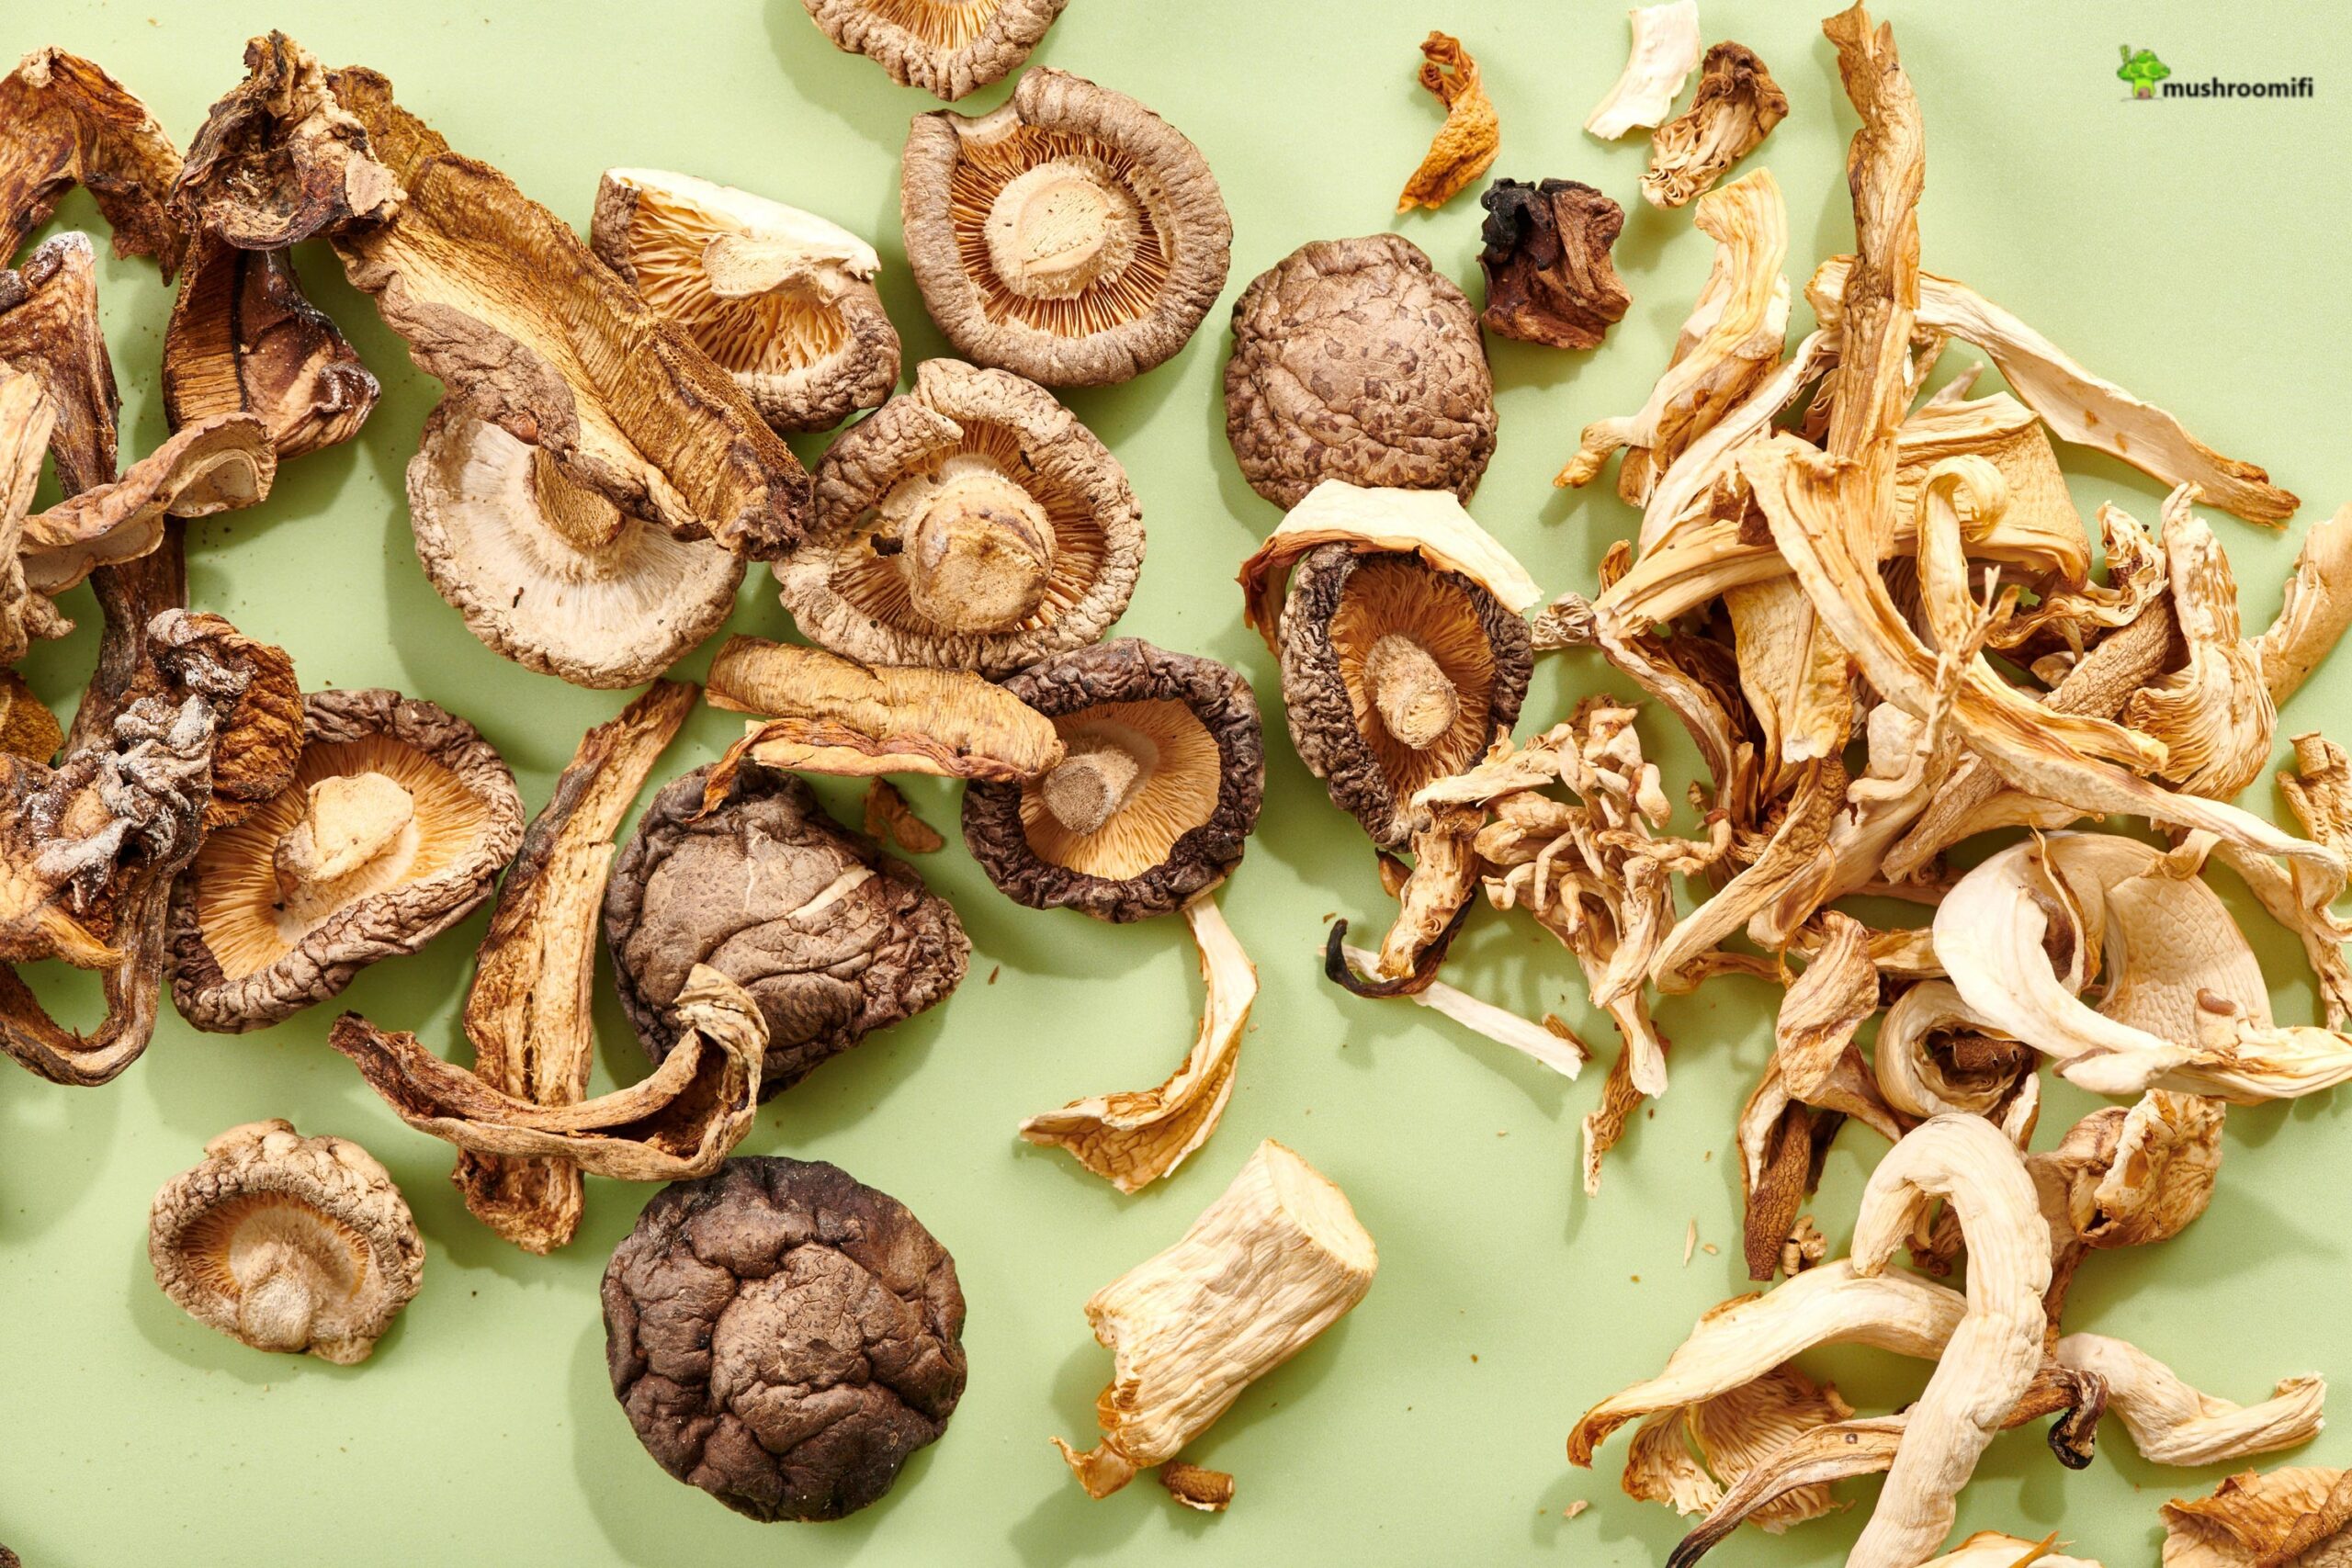 Why use dried mushrooms instead of fresh?